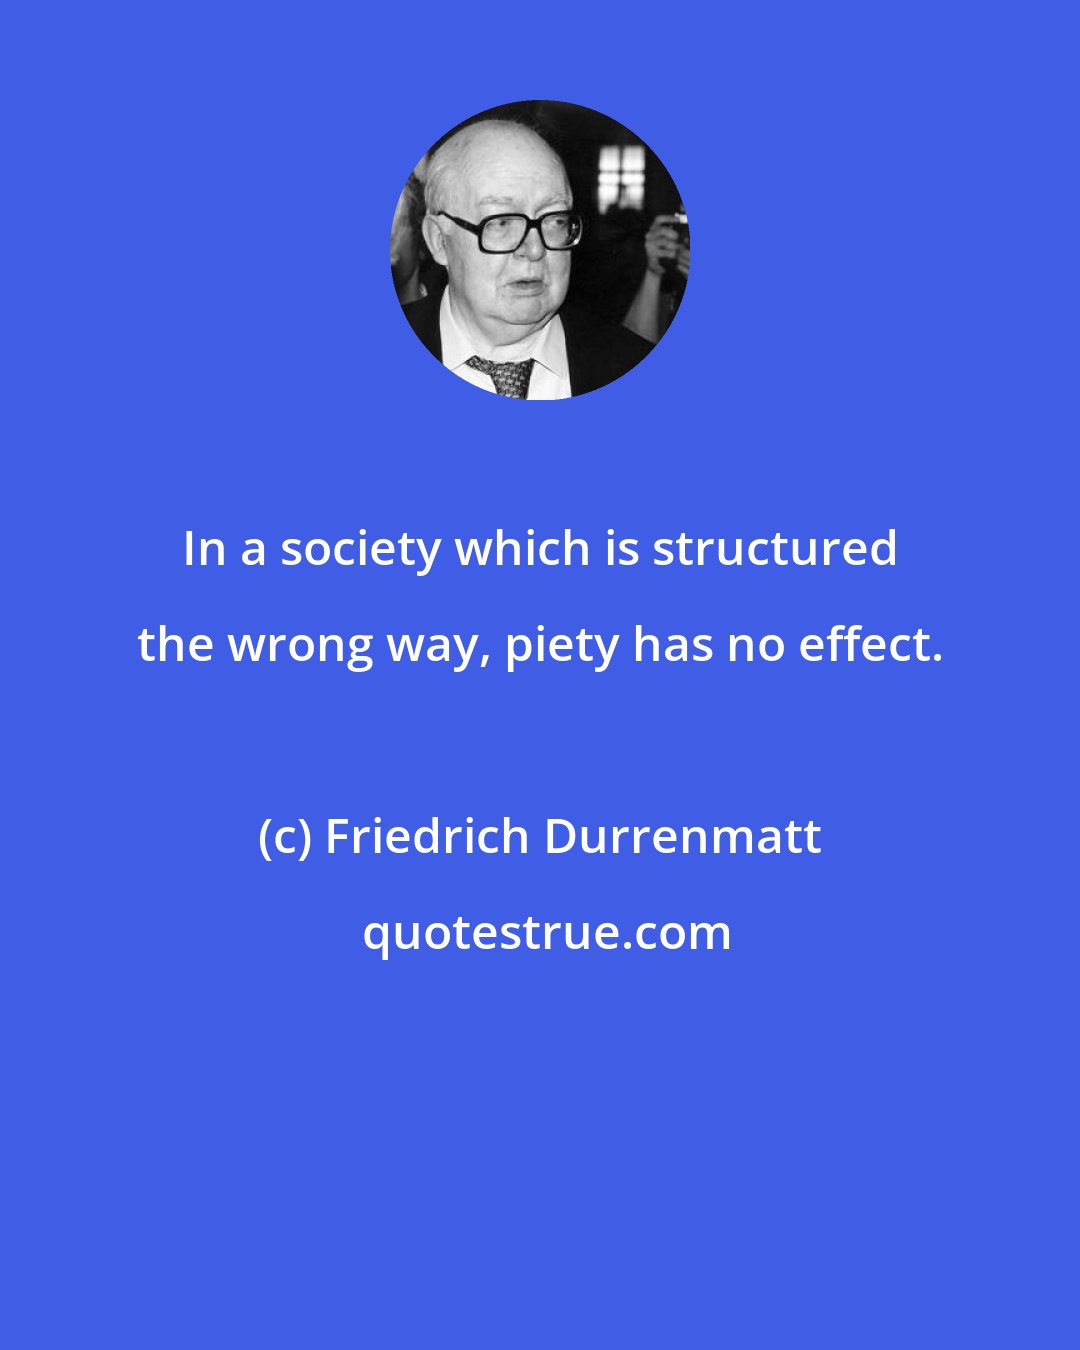 Friedrich Durrenmatt: In a society which is structured the wrong way, piety has no effect.